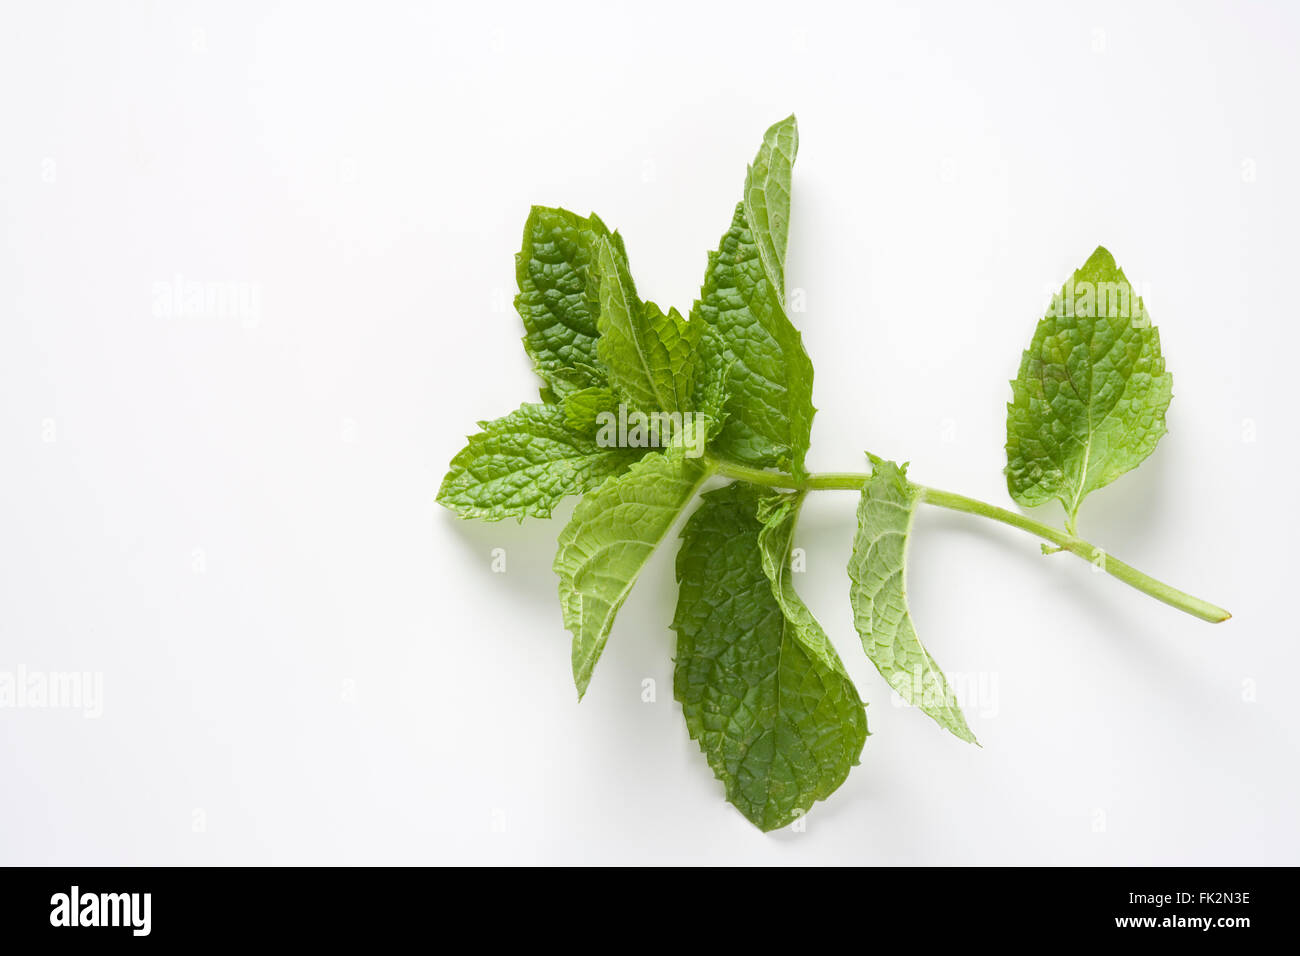 Green Leaves Of Mentha Suaveolens On White Background Stock Photo